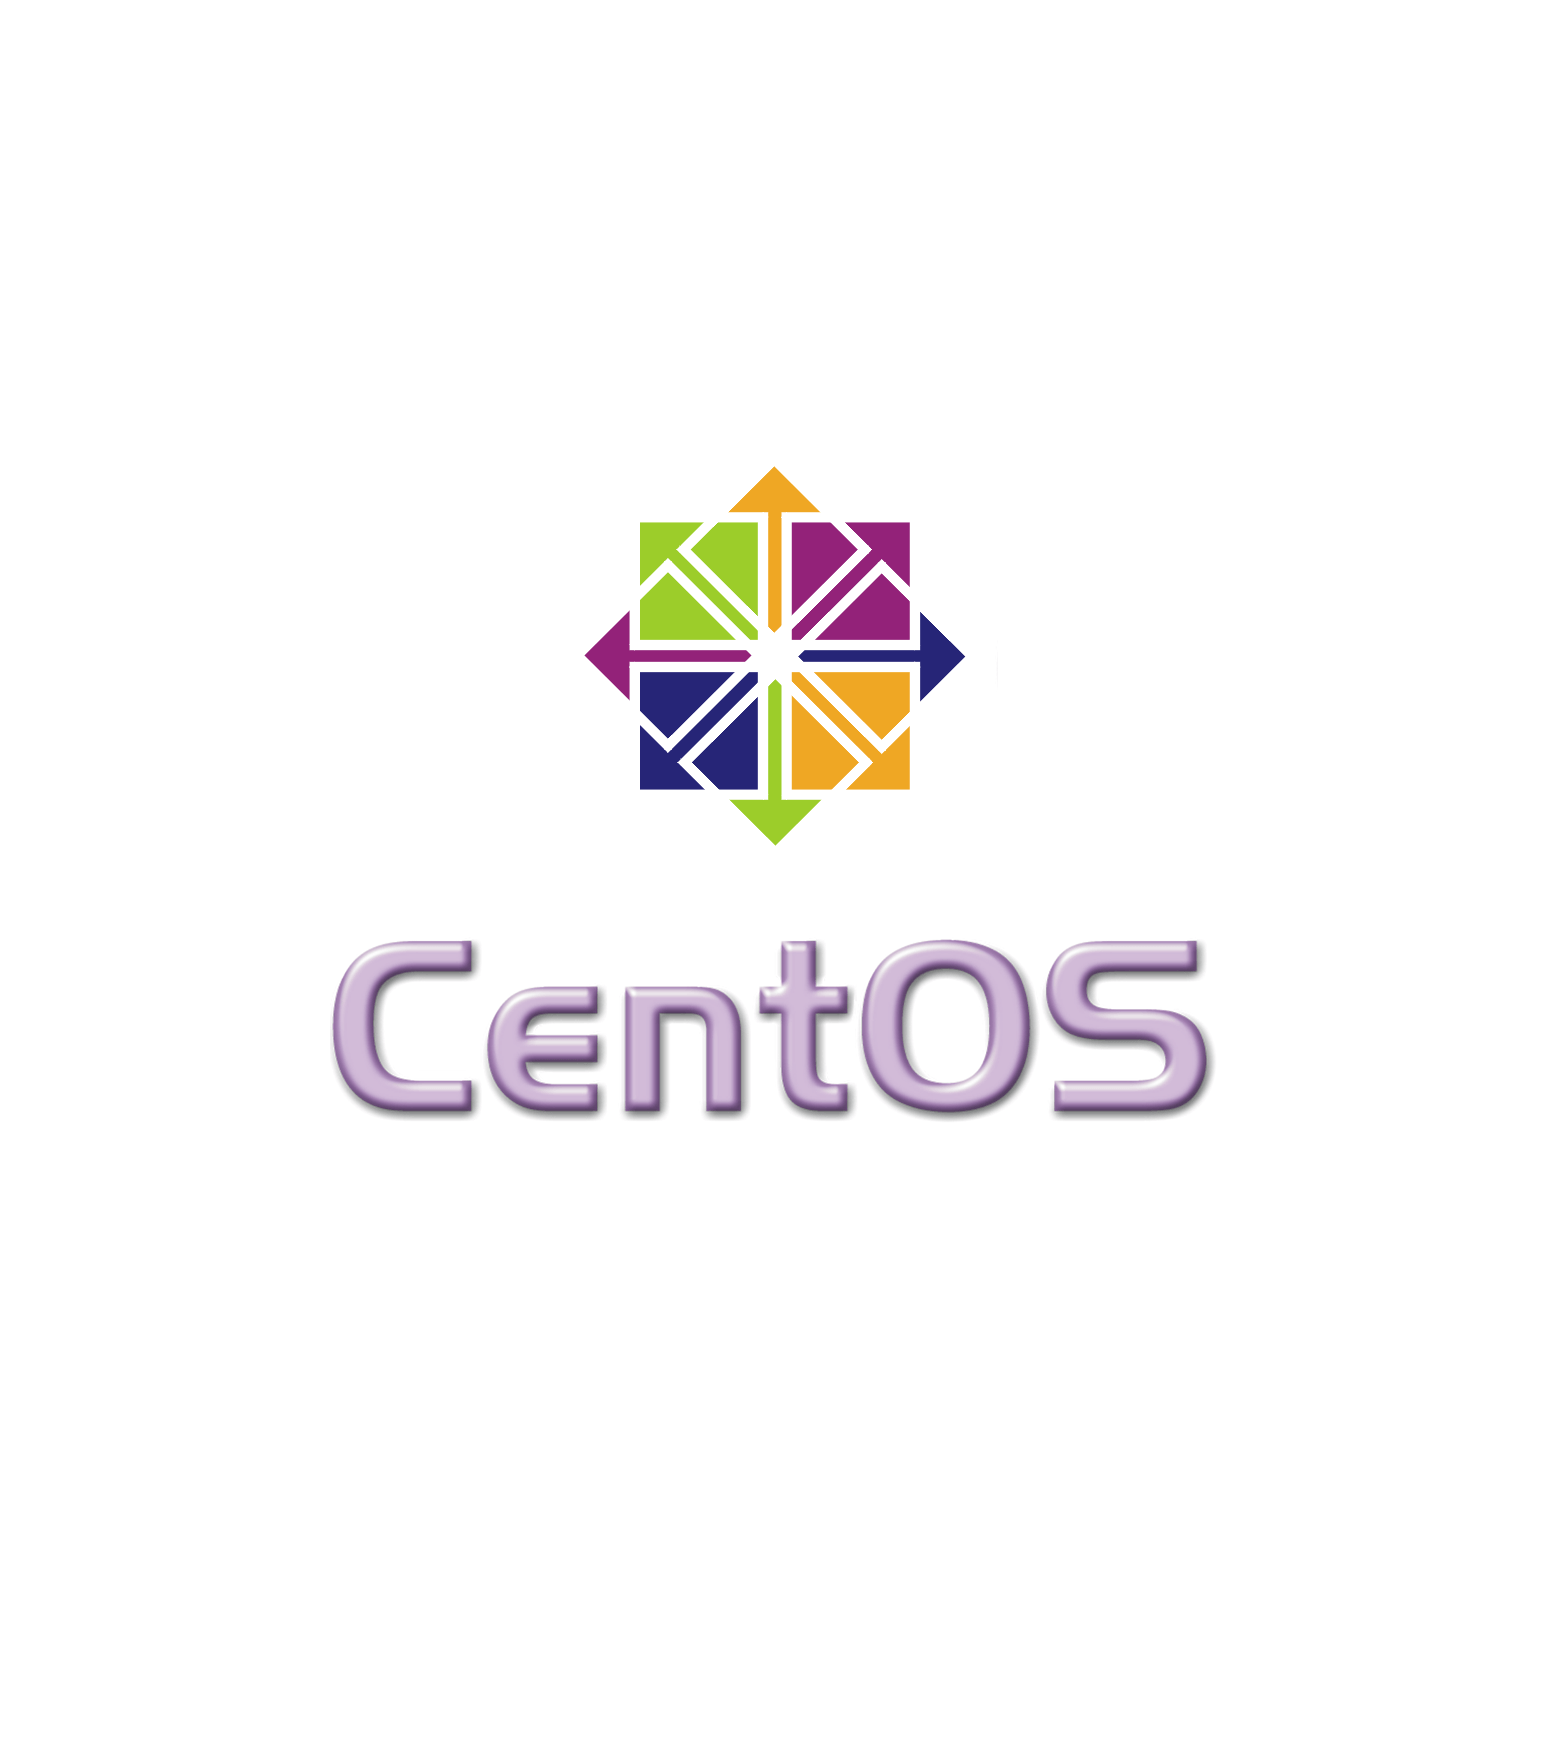 RHEL Logo - Time to update! New release of CentOS Linux 7